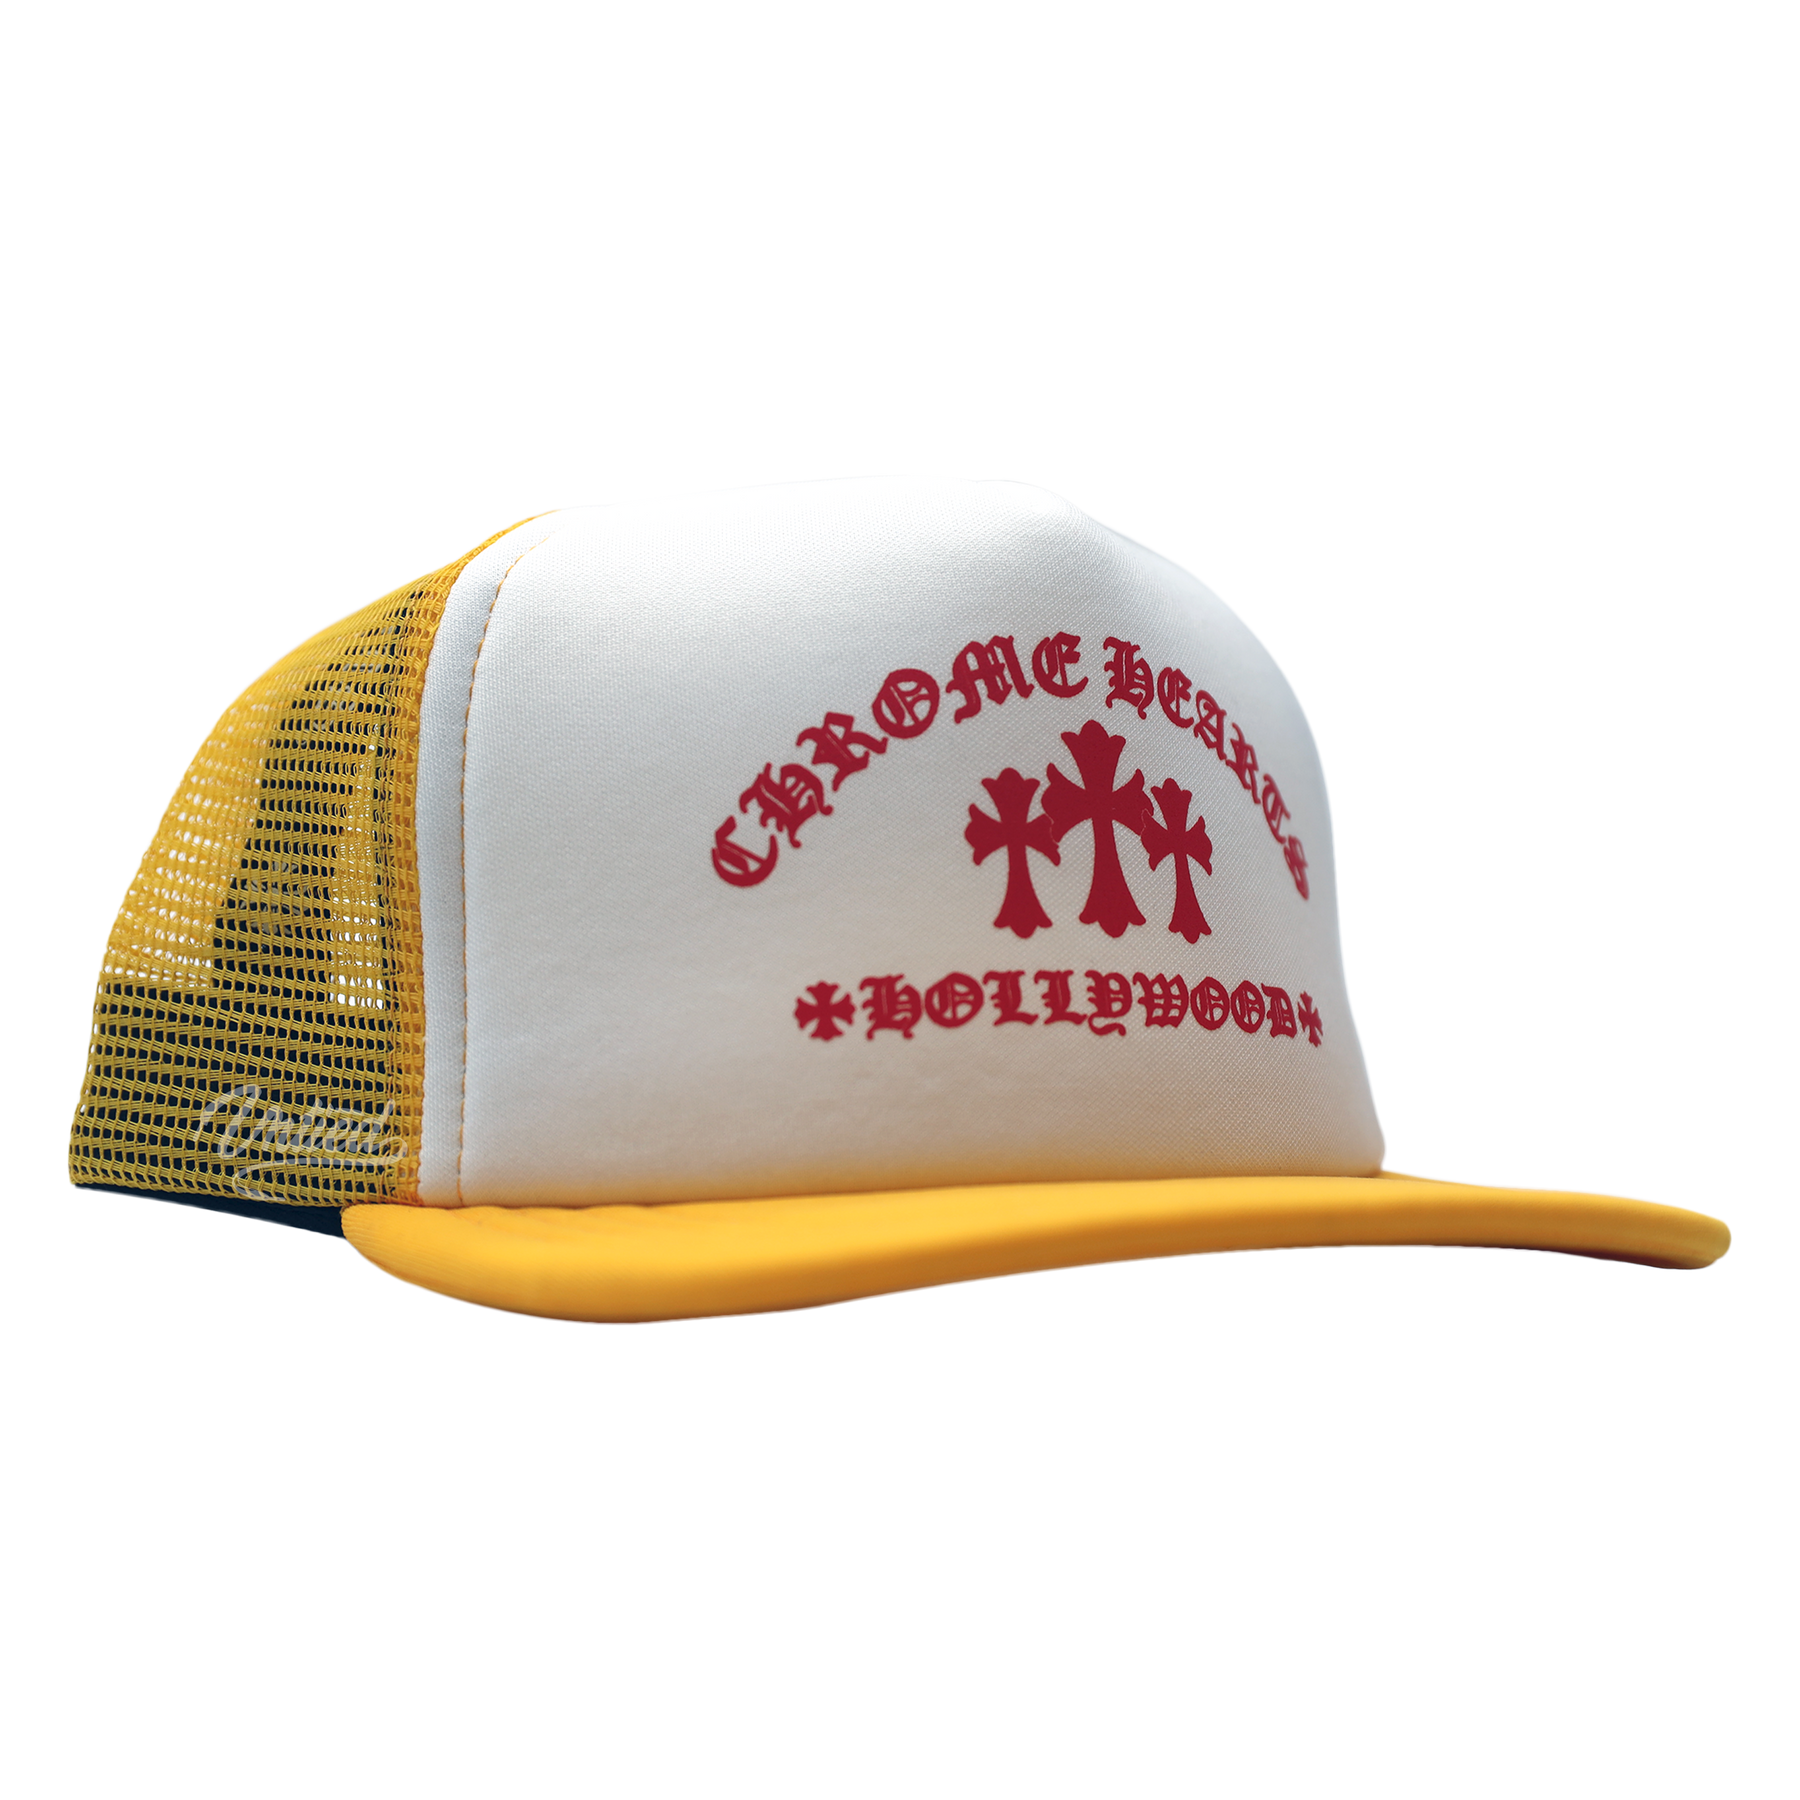 Chrome Hearts Trucker Hat "Yellow/Red King Taco"